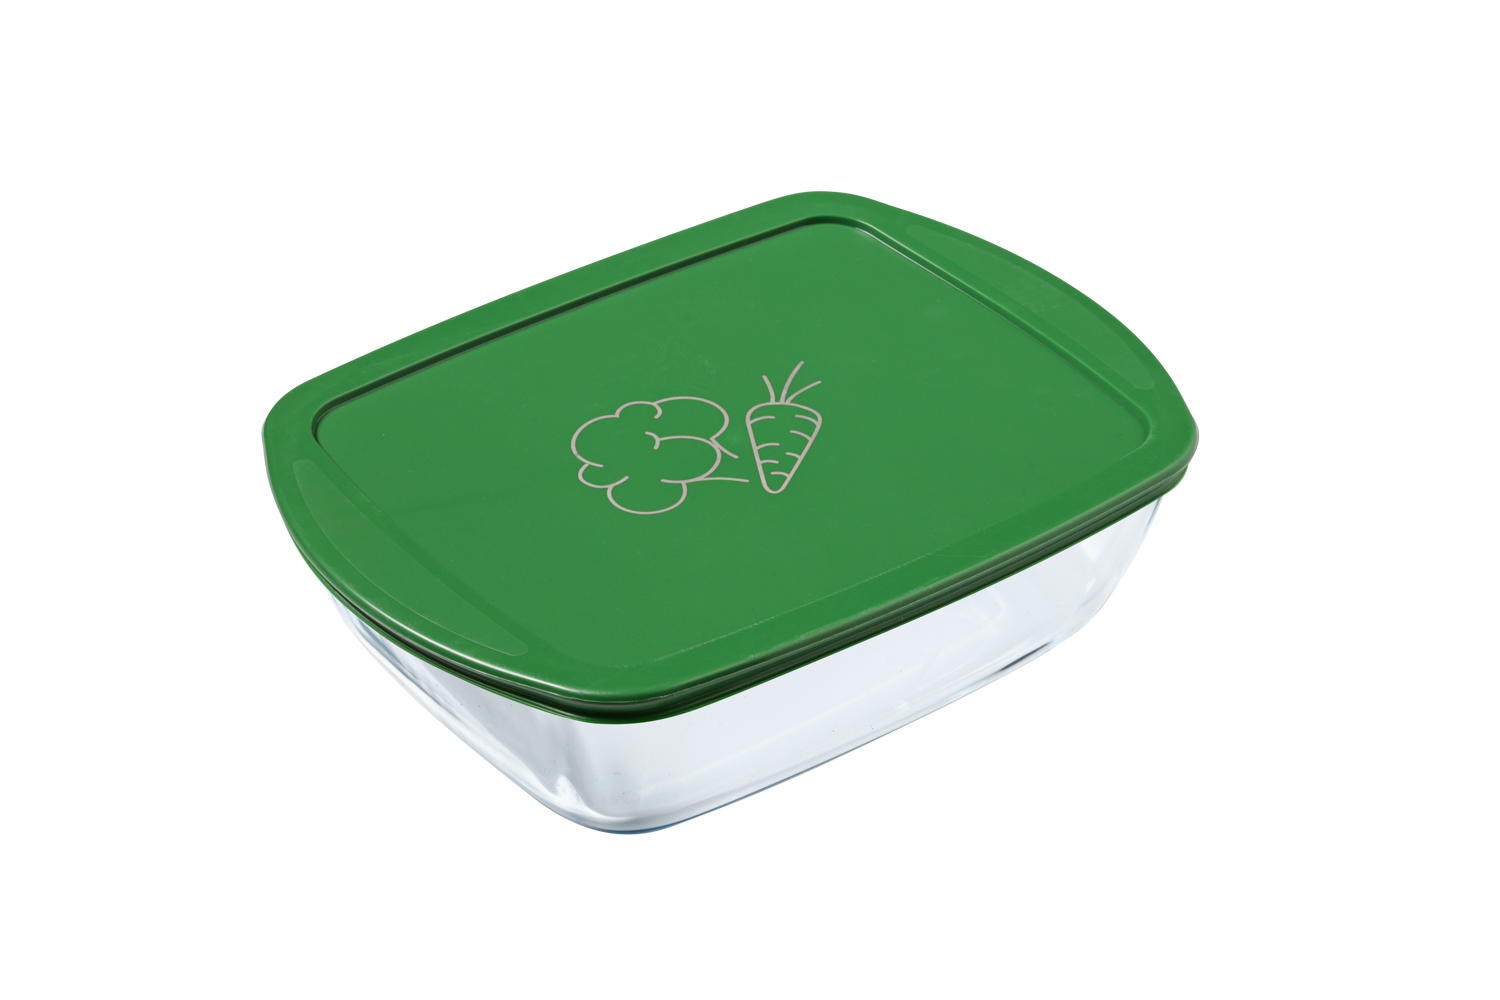 Cook & Store - Rectangular glass dish with green lid - plants